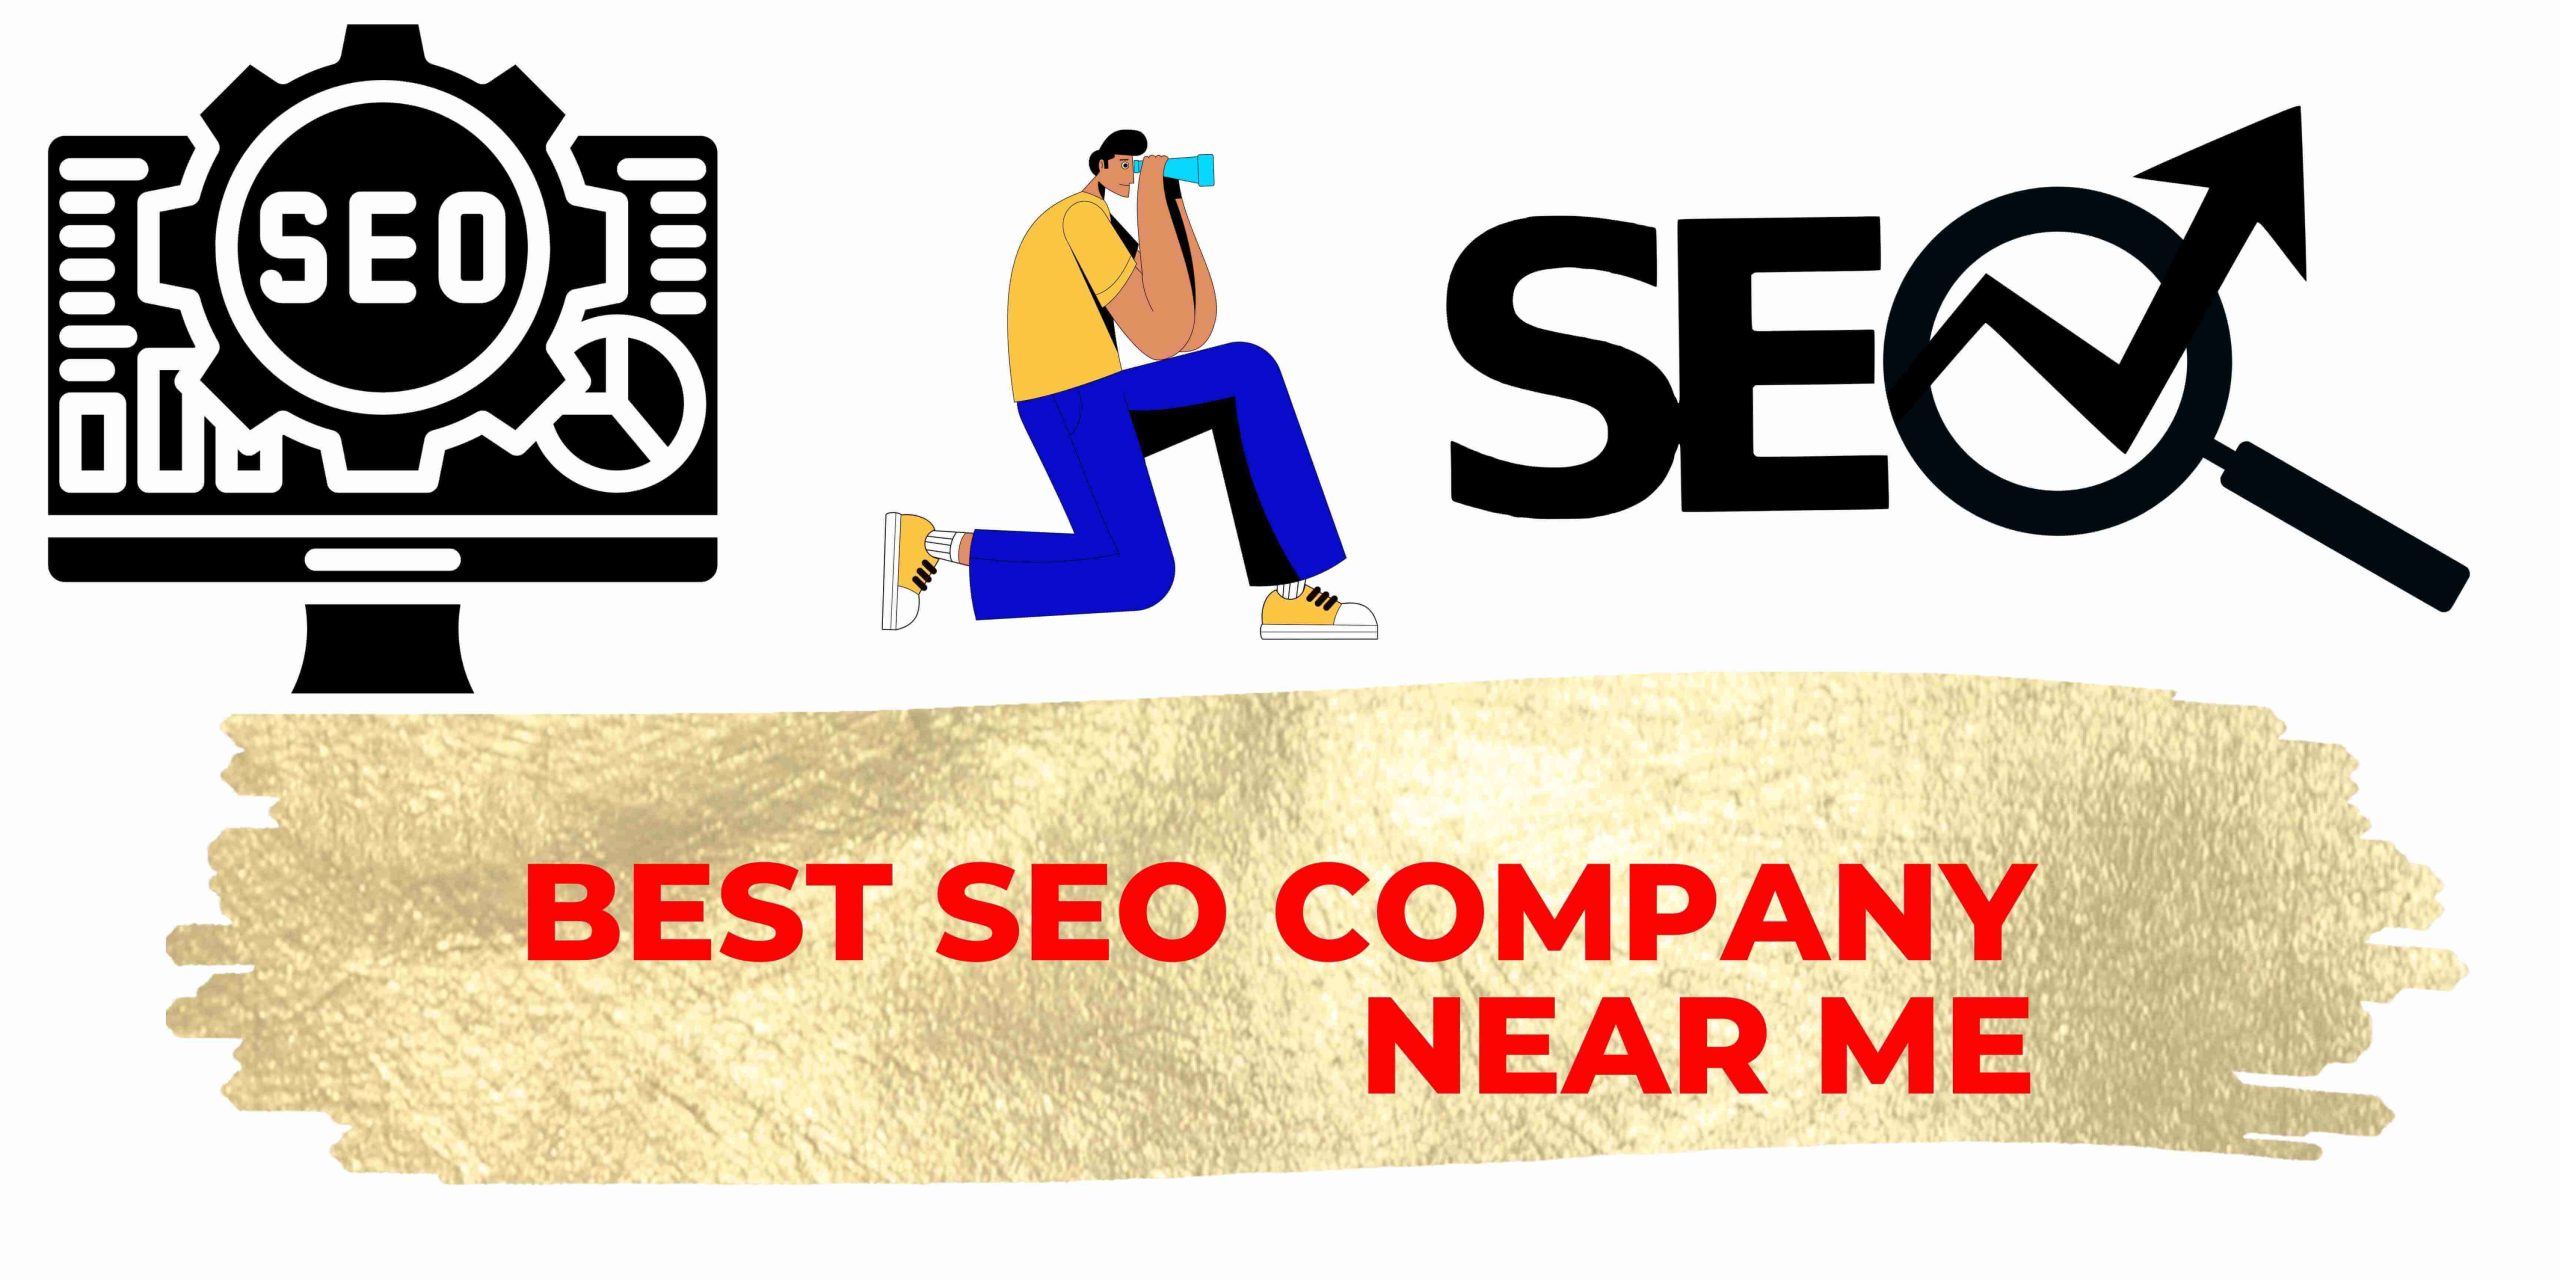 alt="steps to find the best seo company near me"